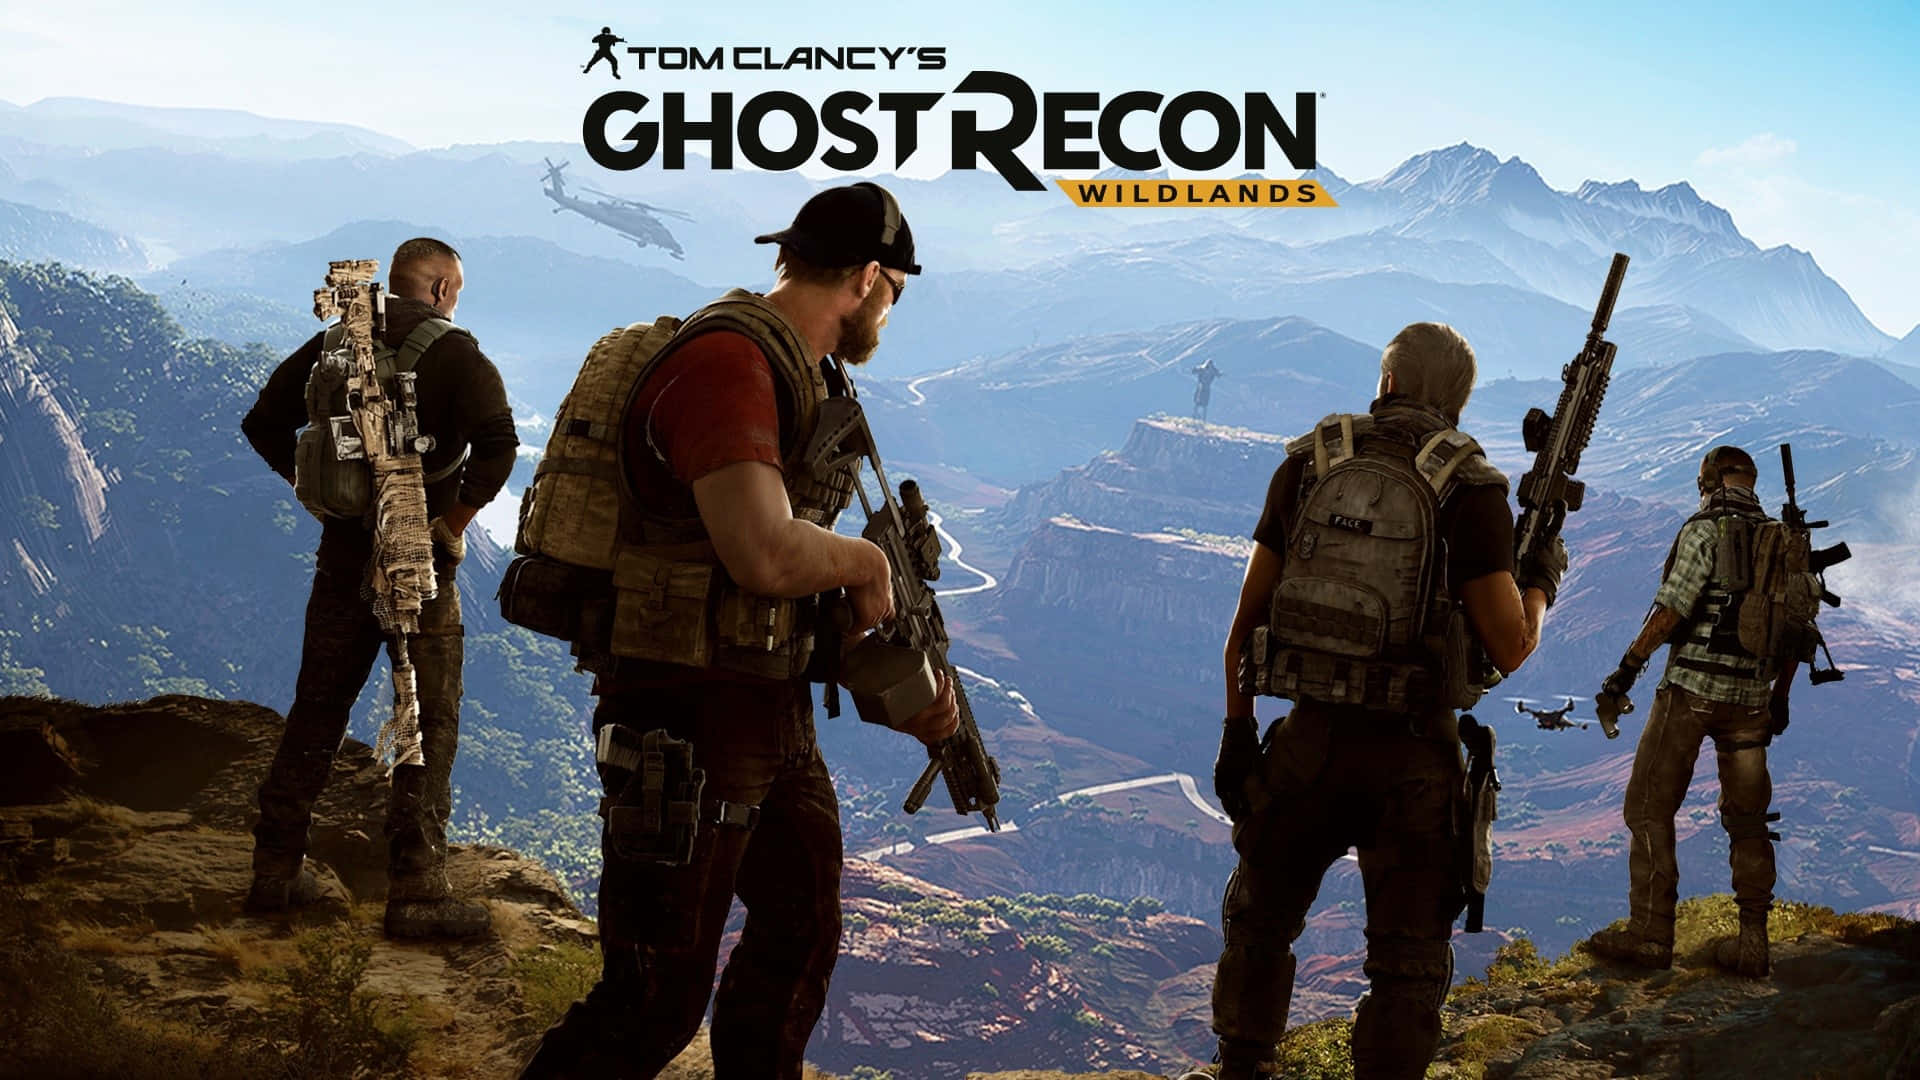 Hd Ghost Recon Wildlands Background Poster Squad On High Ground